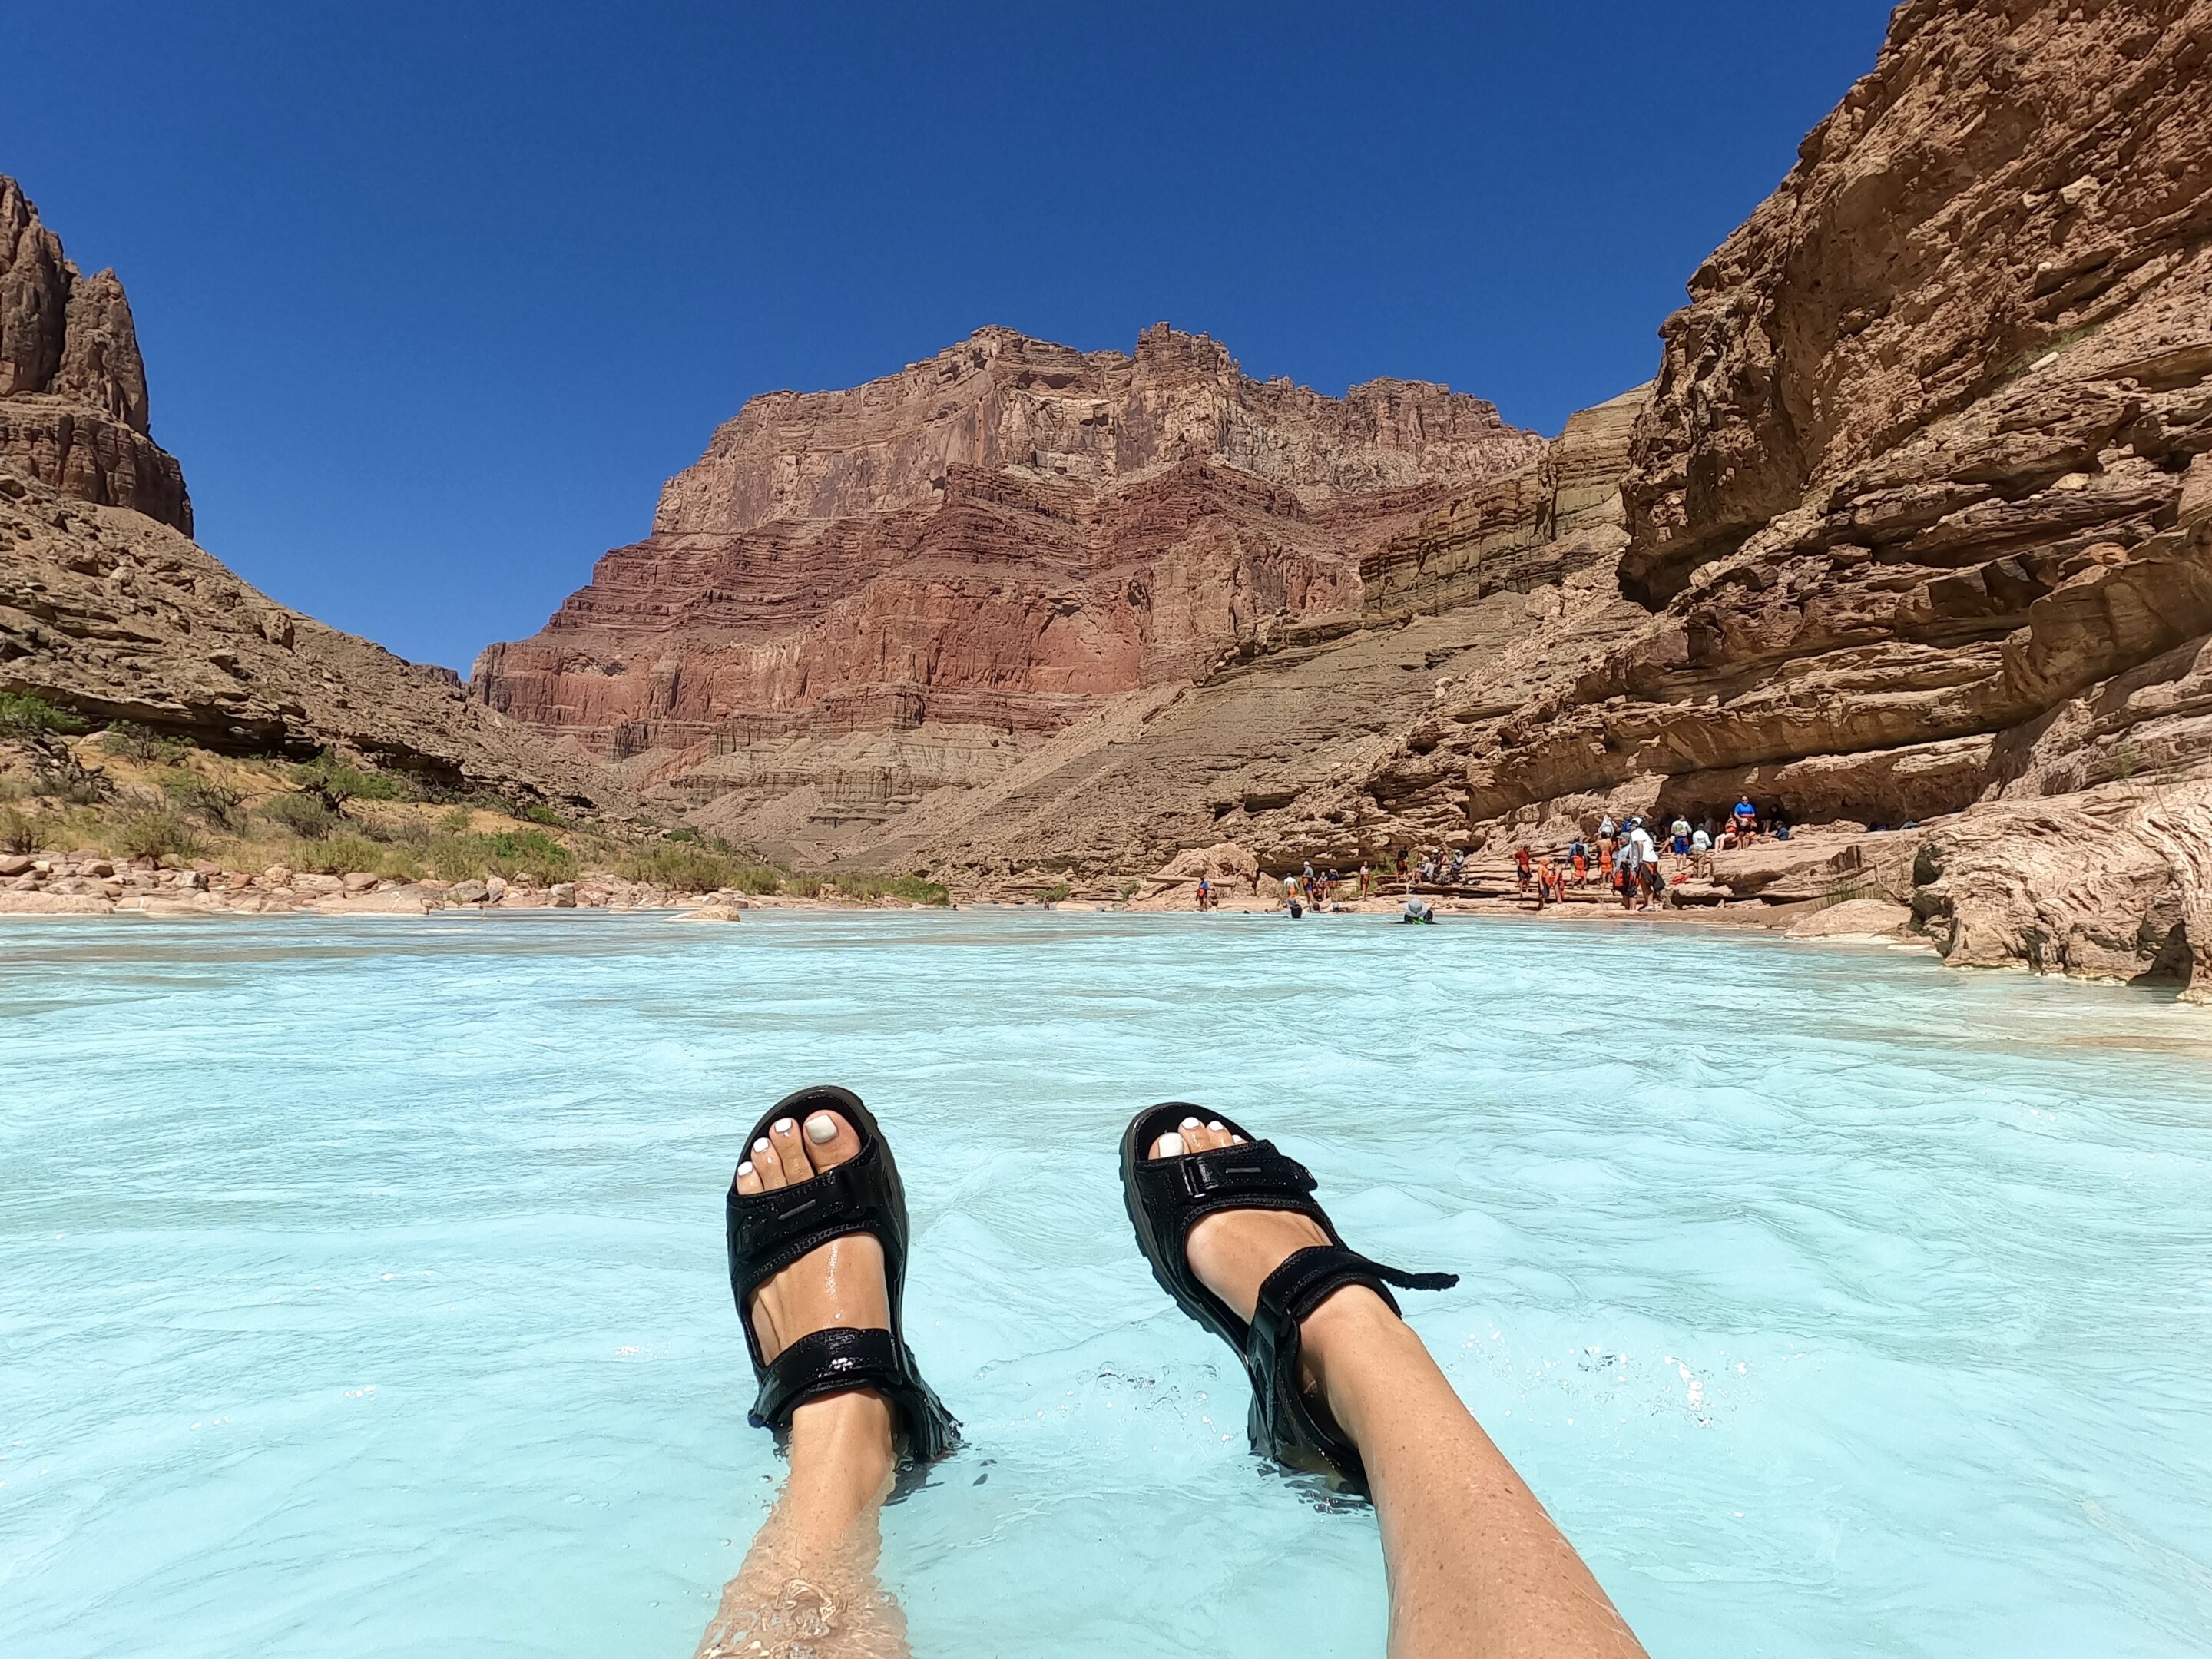 Feet in Teva sandals floating in the bright blue Little Colorado River in Grand Canyon